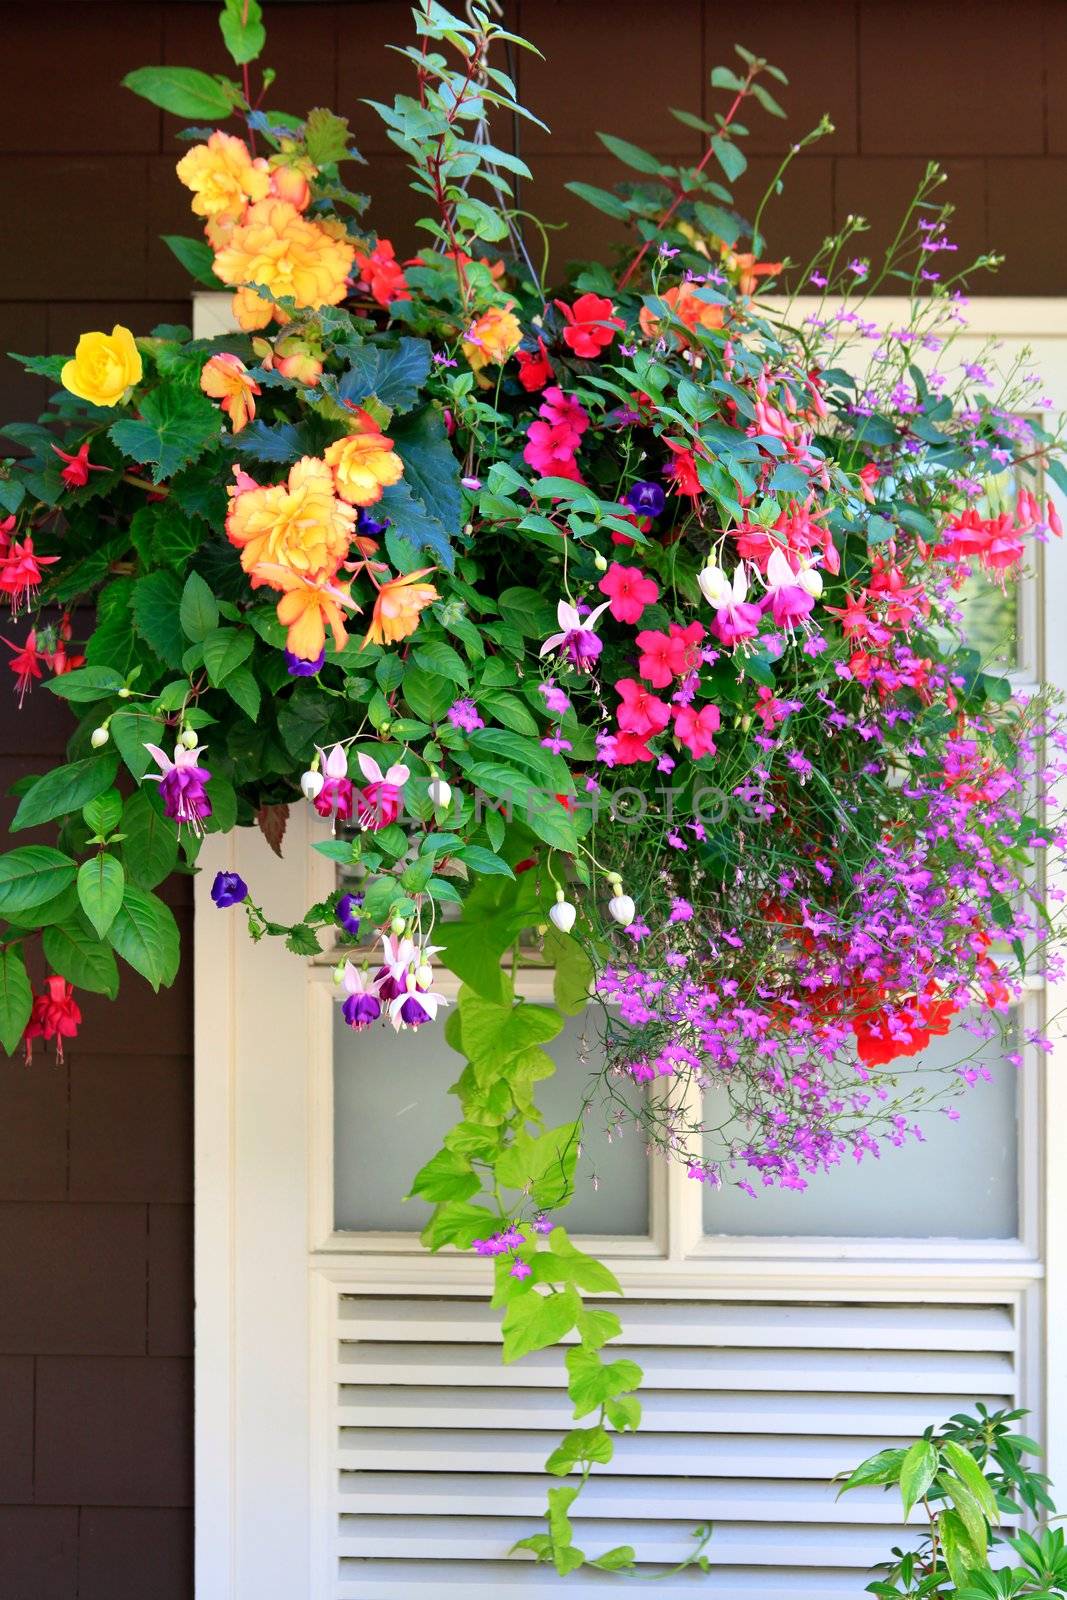 baskets with flowers outside of house windows.